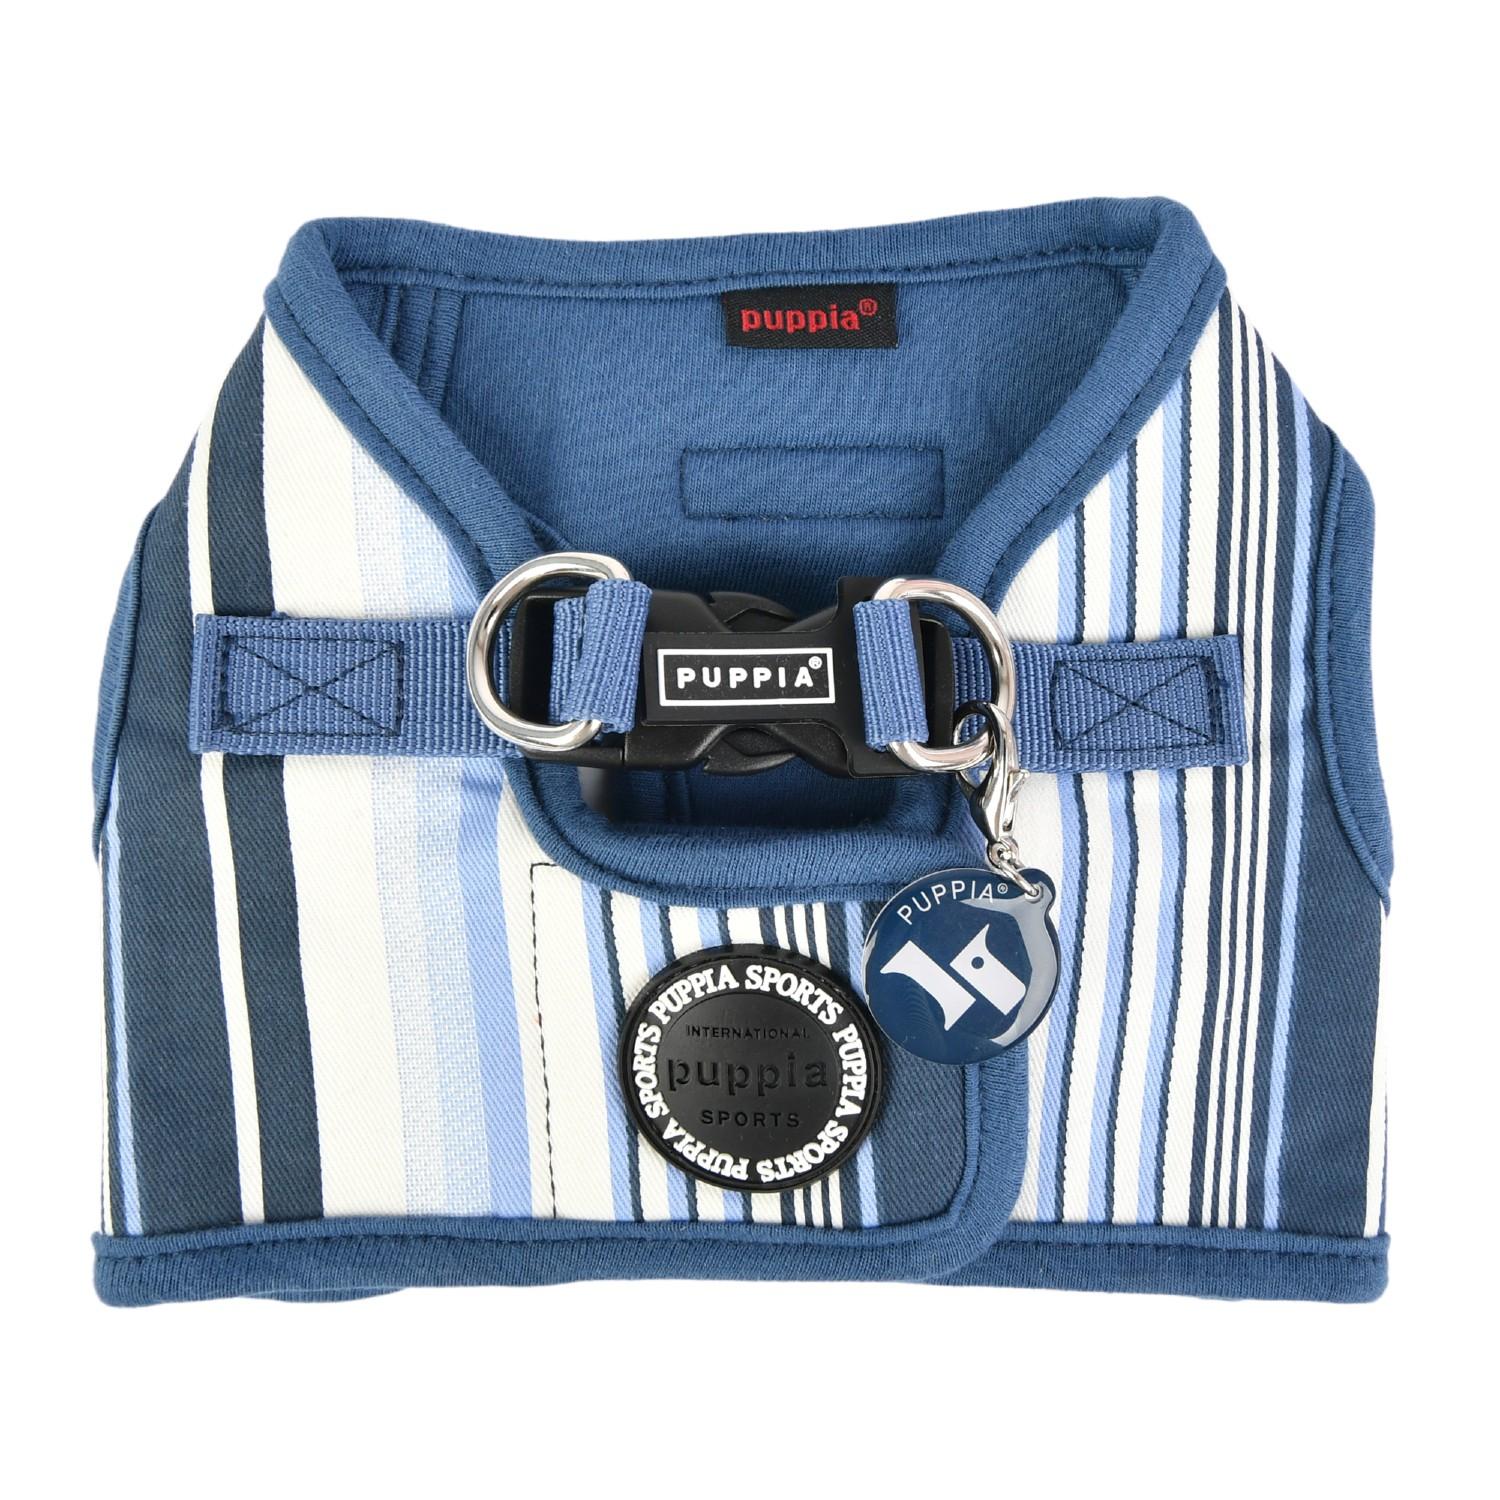 Caiden Vest Dog Harness by Puppia - Blue